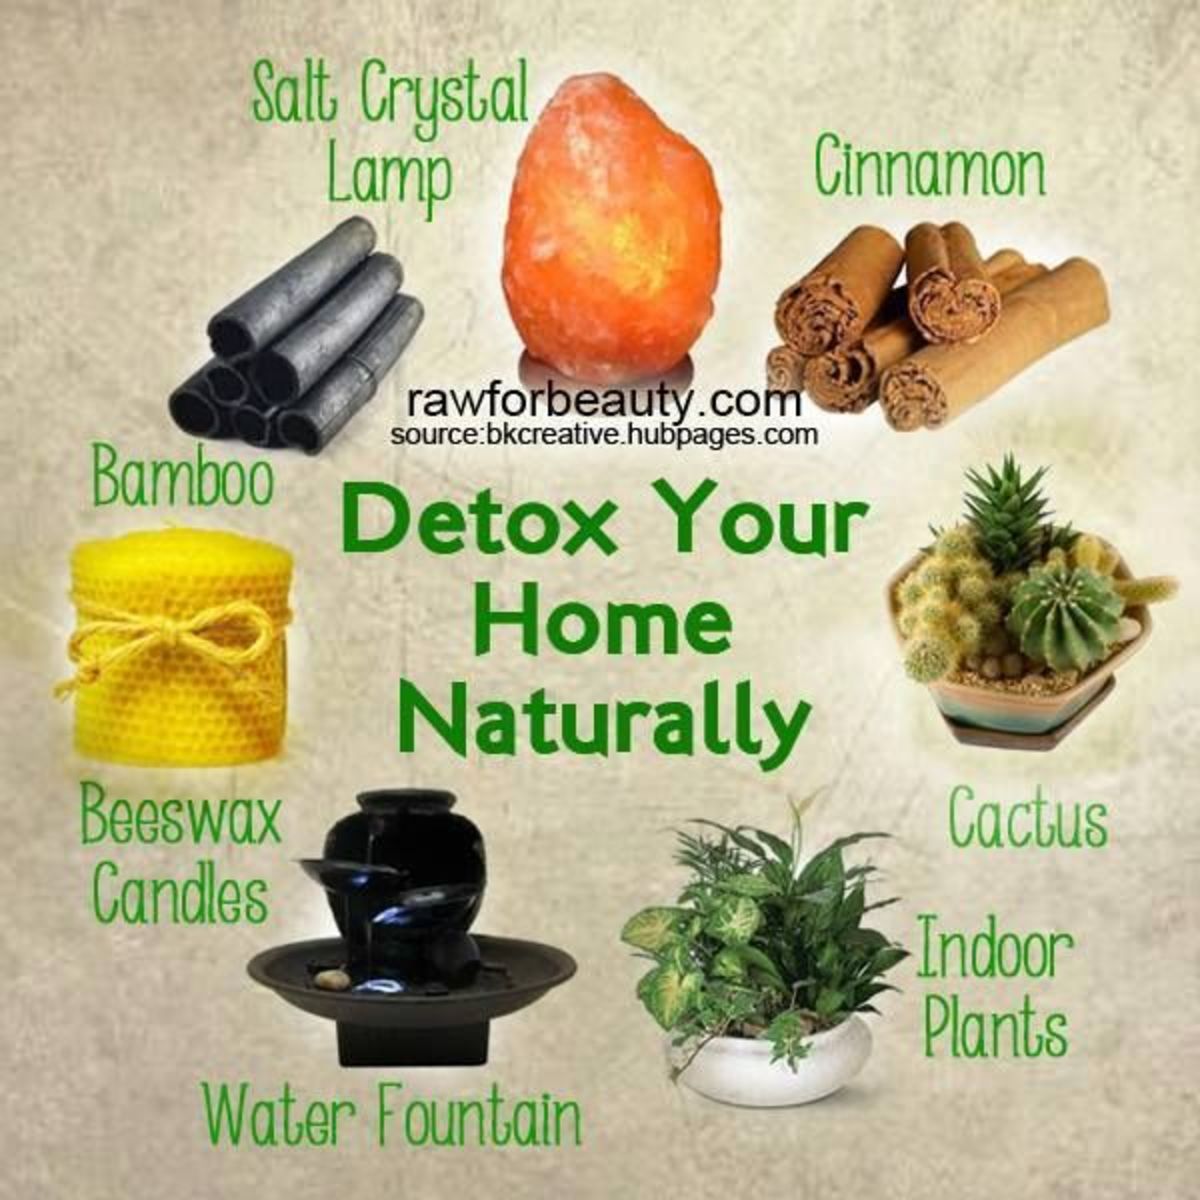 Detox your home naturally